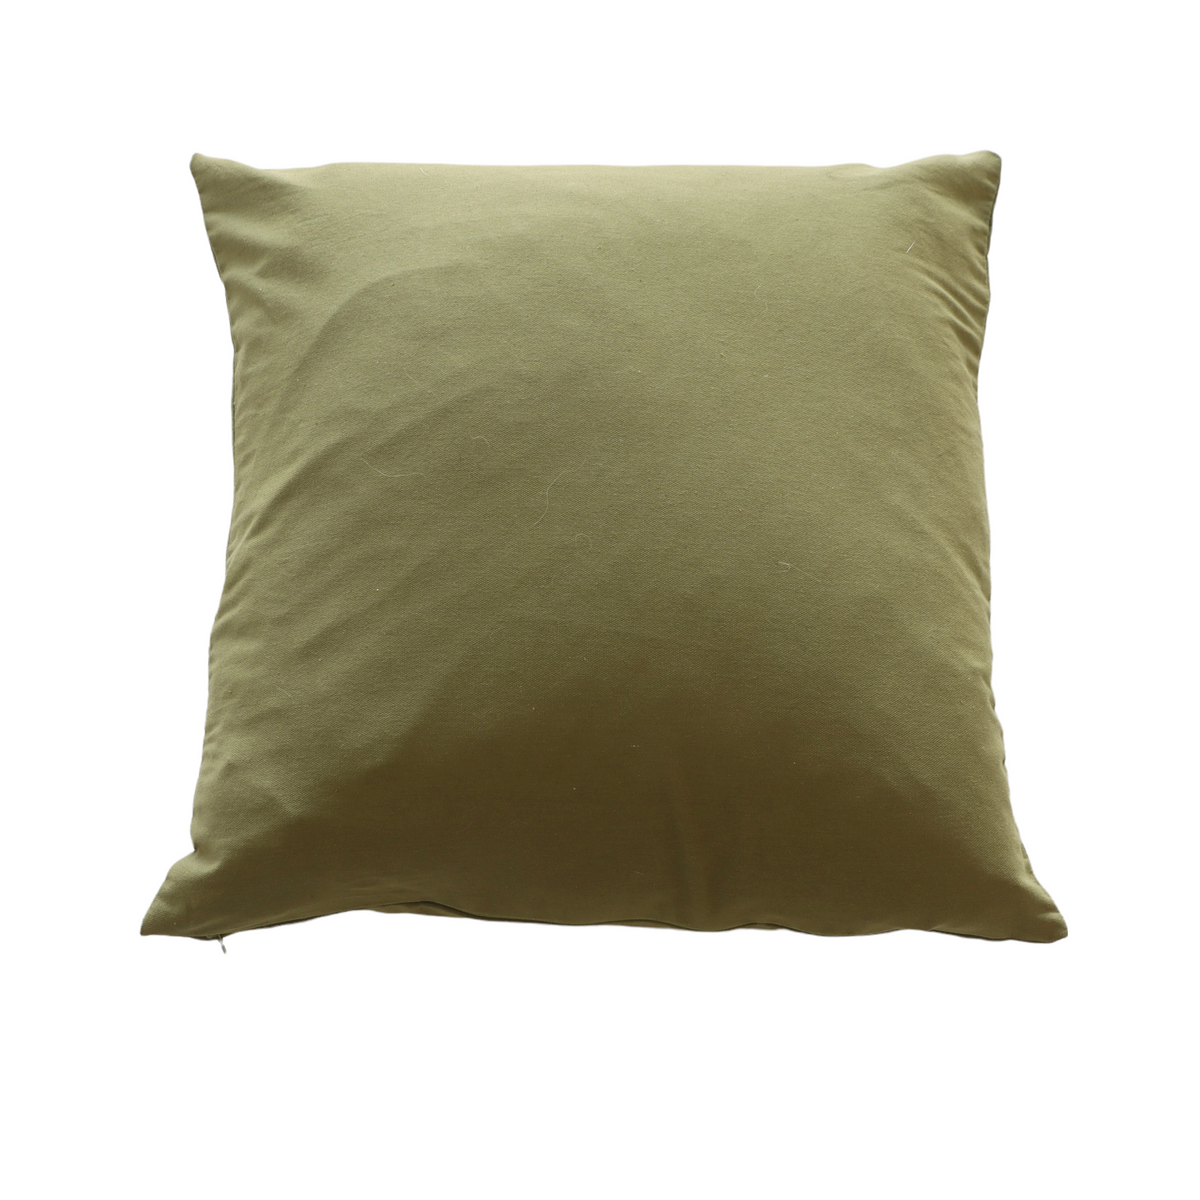 Monstera Pillow with Down Fill - Holistic Habitat 